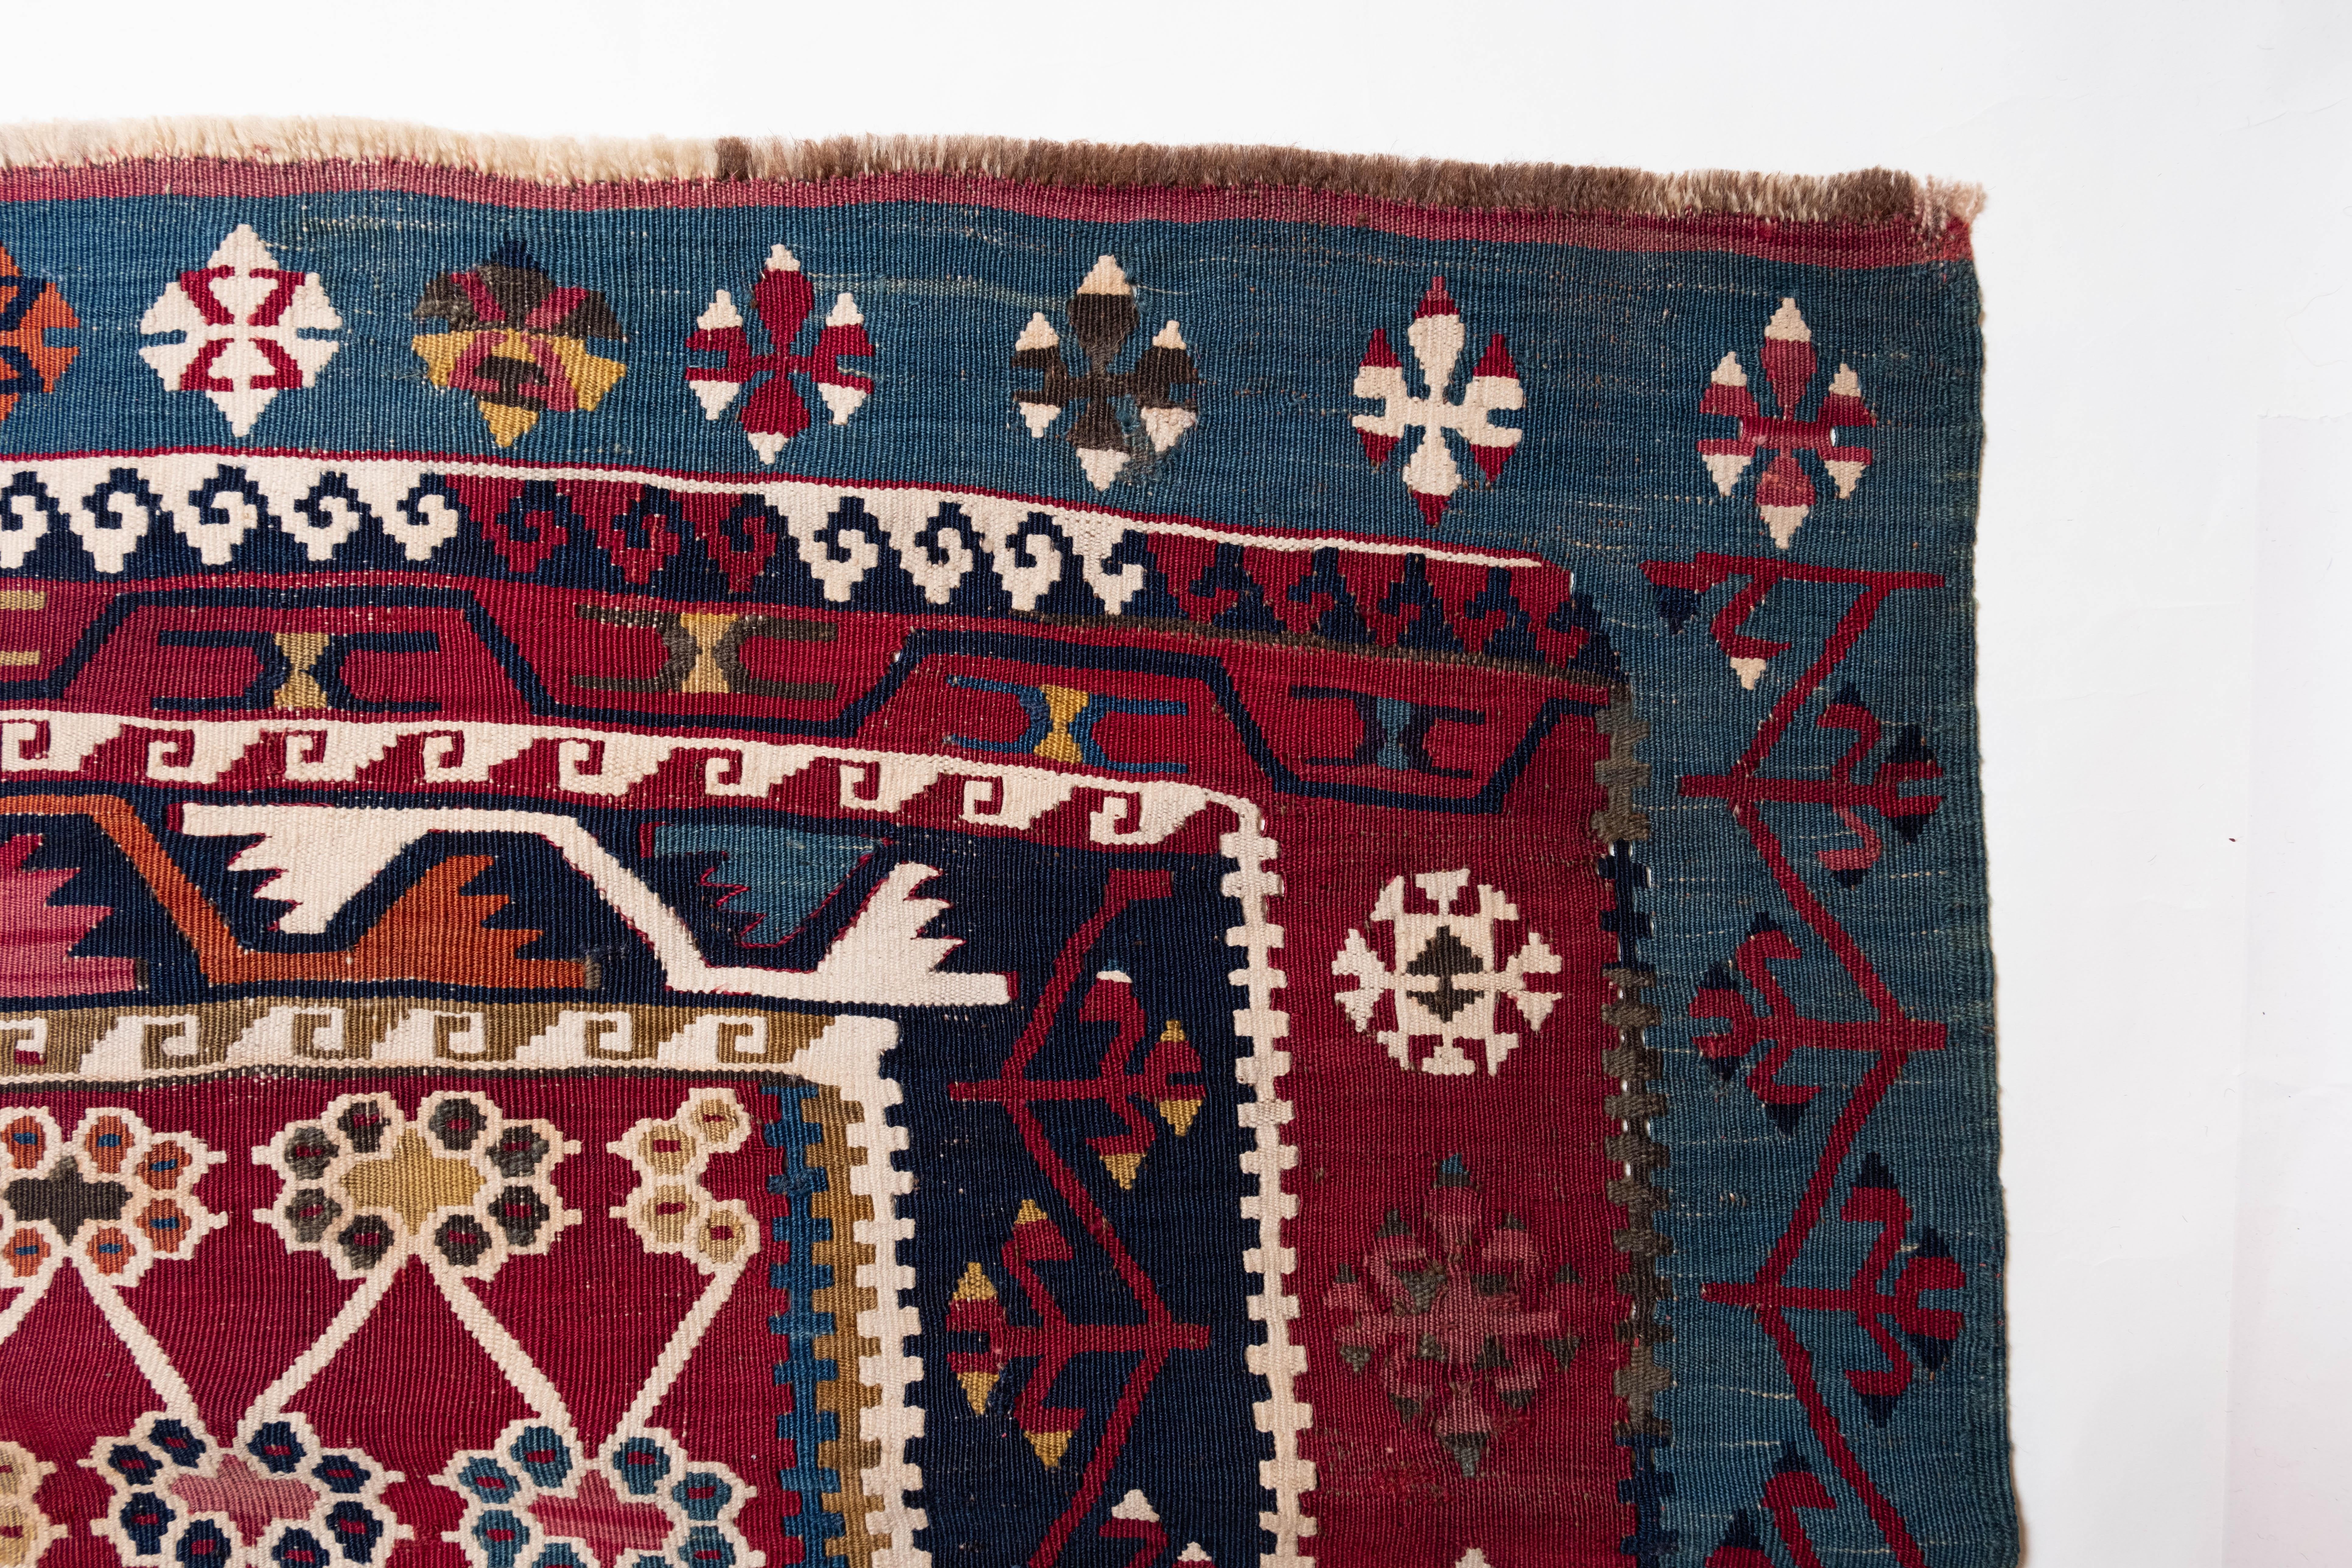 This is Eastern Anatolian Antique Kilim from the Reyhanli region with a rare and beautiful color composition.

Due to its outstanding quality, the old Reyhanlı kilim is highly acclaimed around the world as one of the finest kilims woven in Anatolia.